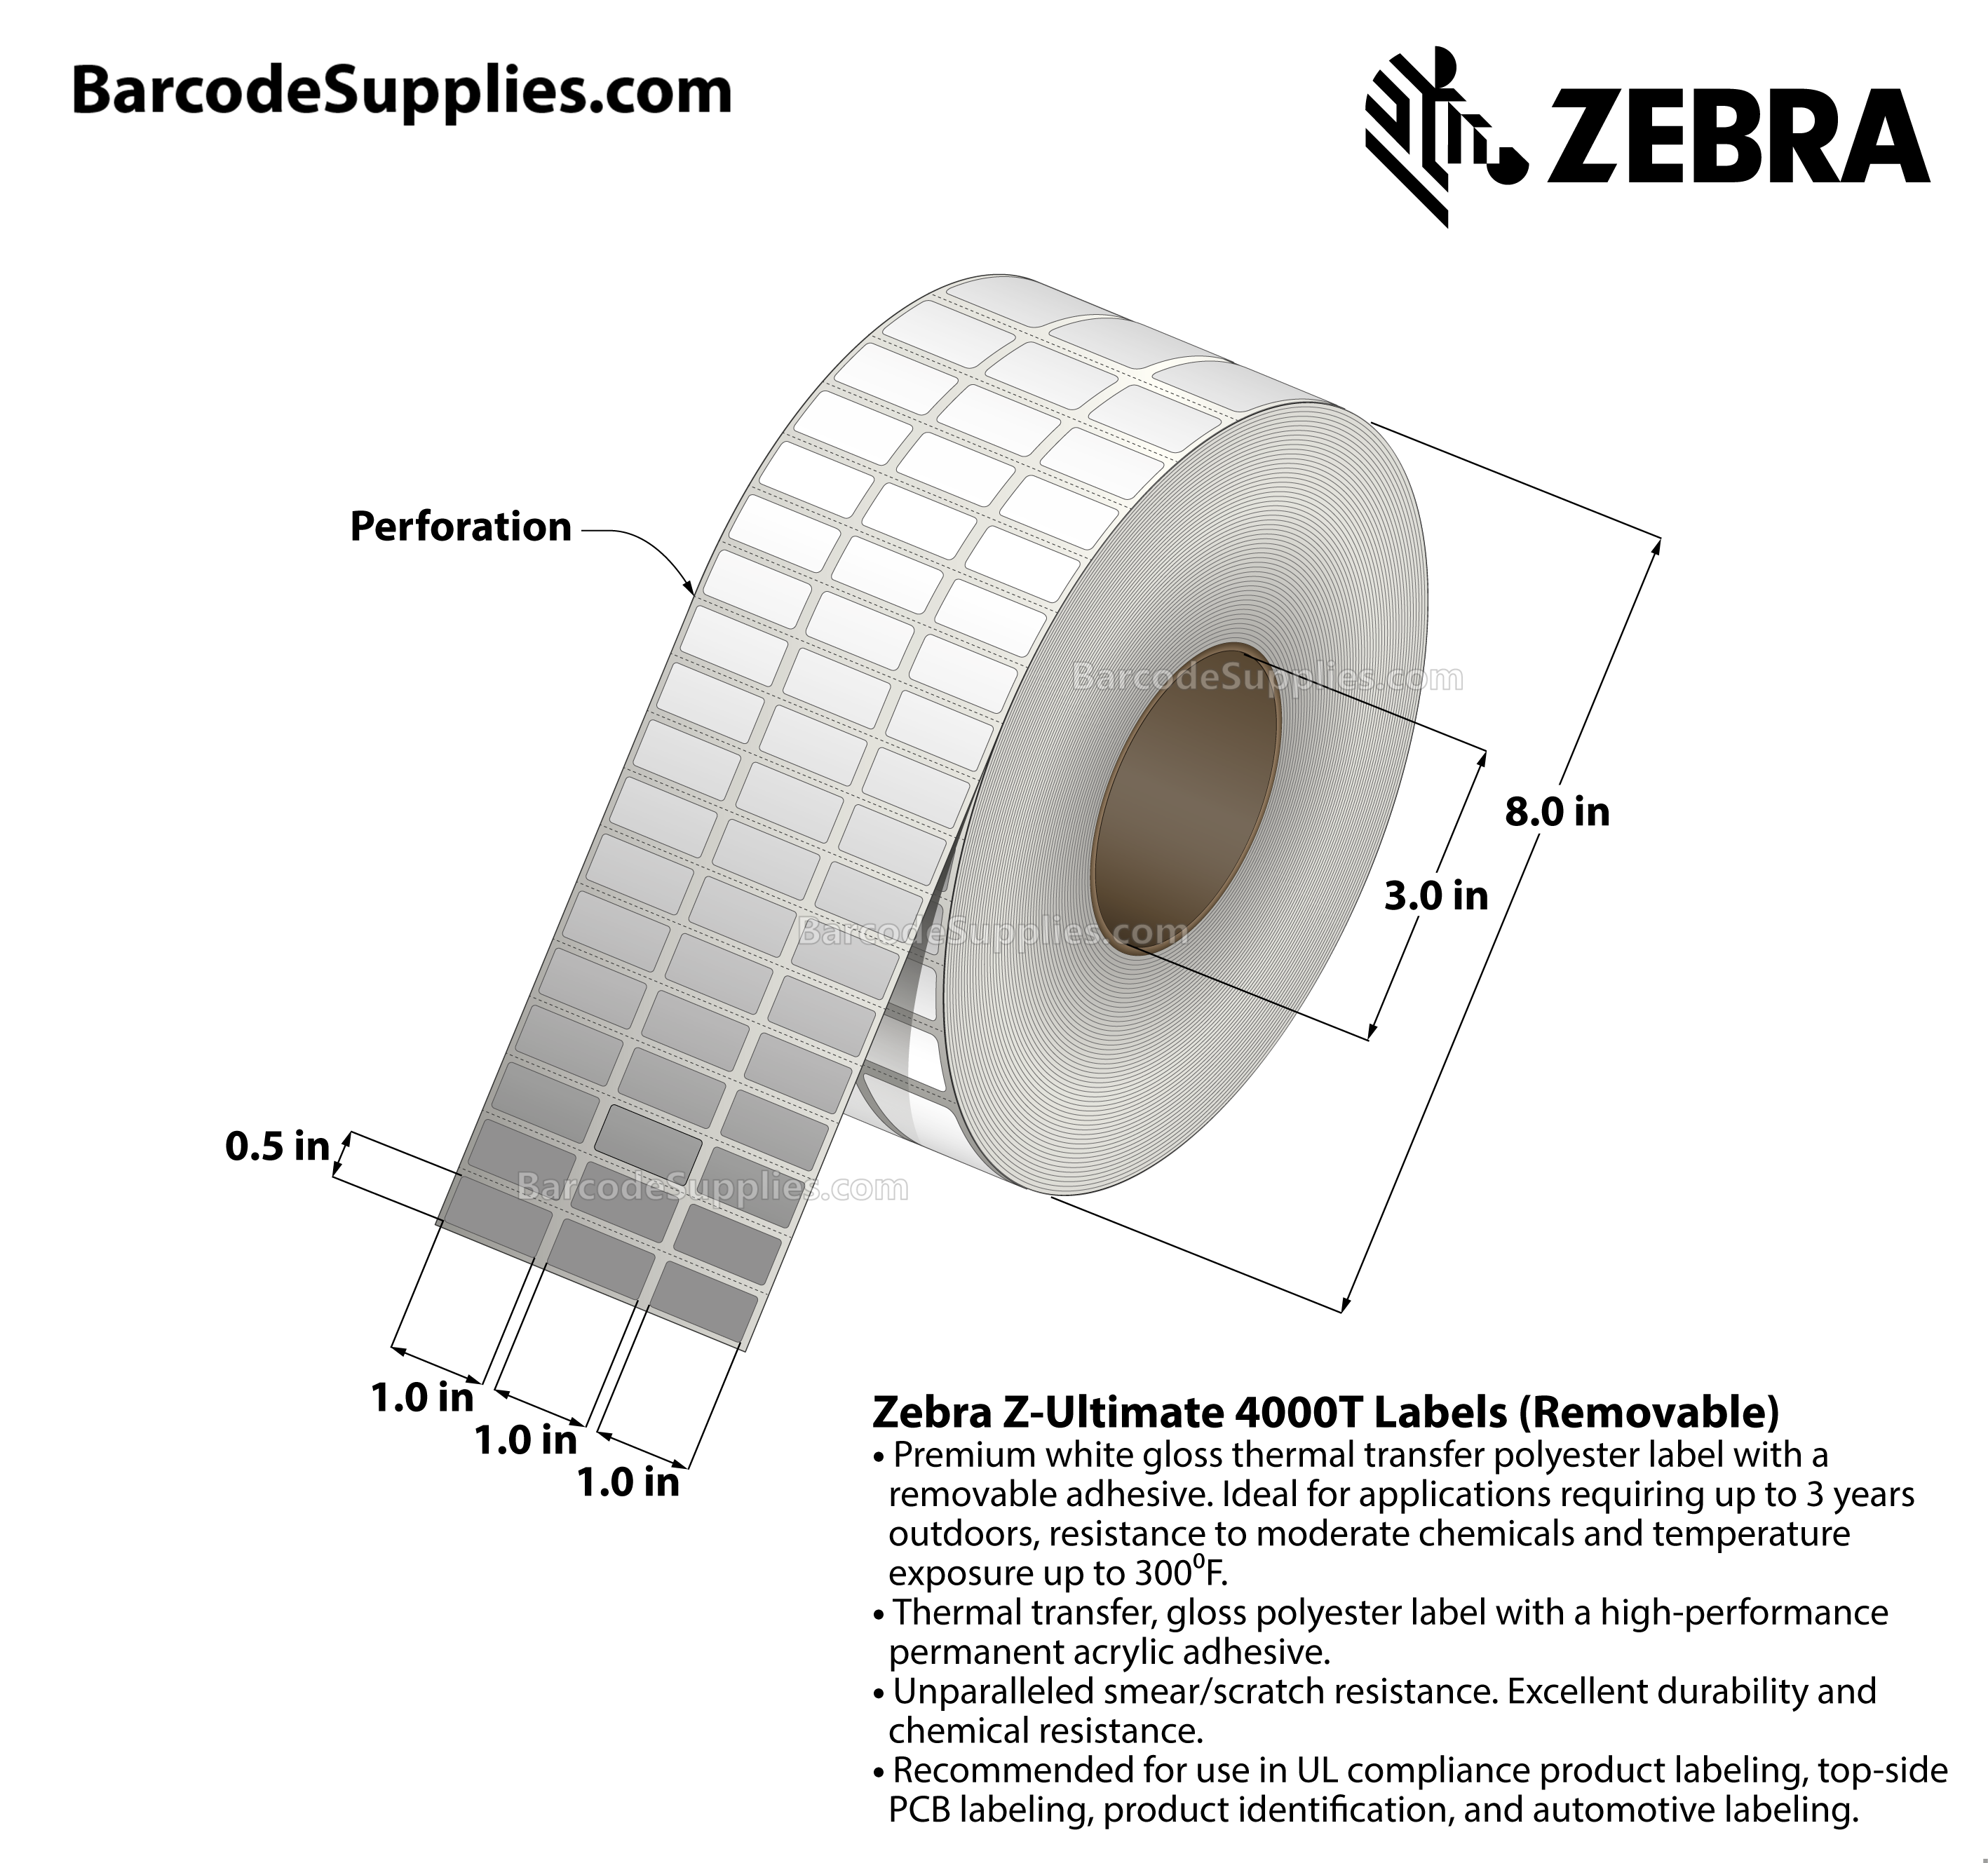 1 x 0.5 Thermal Transfer White Z-Ultimate 4000T Removable (3-Across) Labels With Removable Adhesive - Perforated - 10002 Labels Per Roll - Carton Of 1 Rolls - 10002 Labels Total - MPN: 10023069